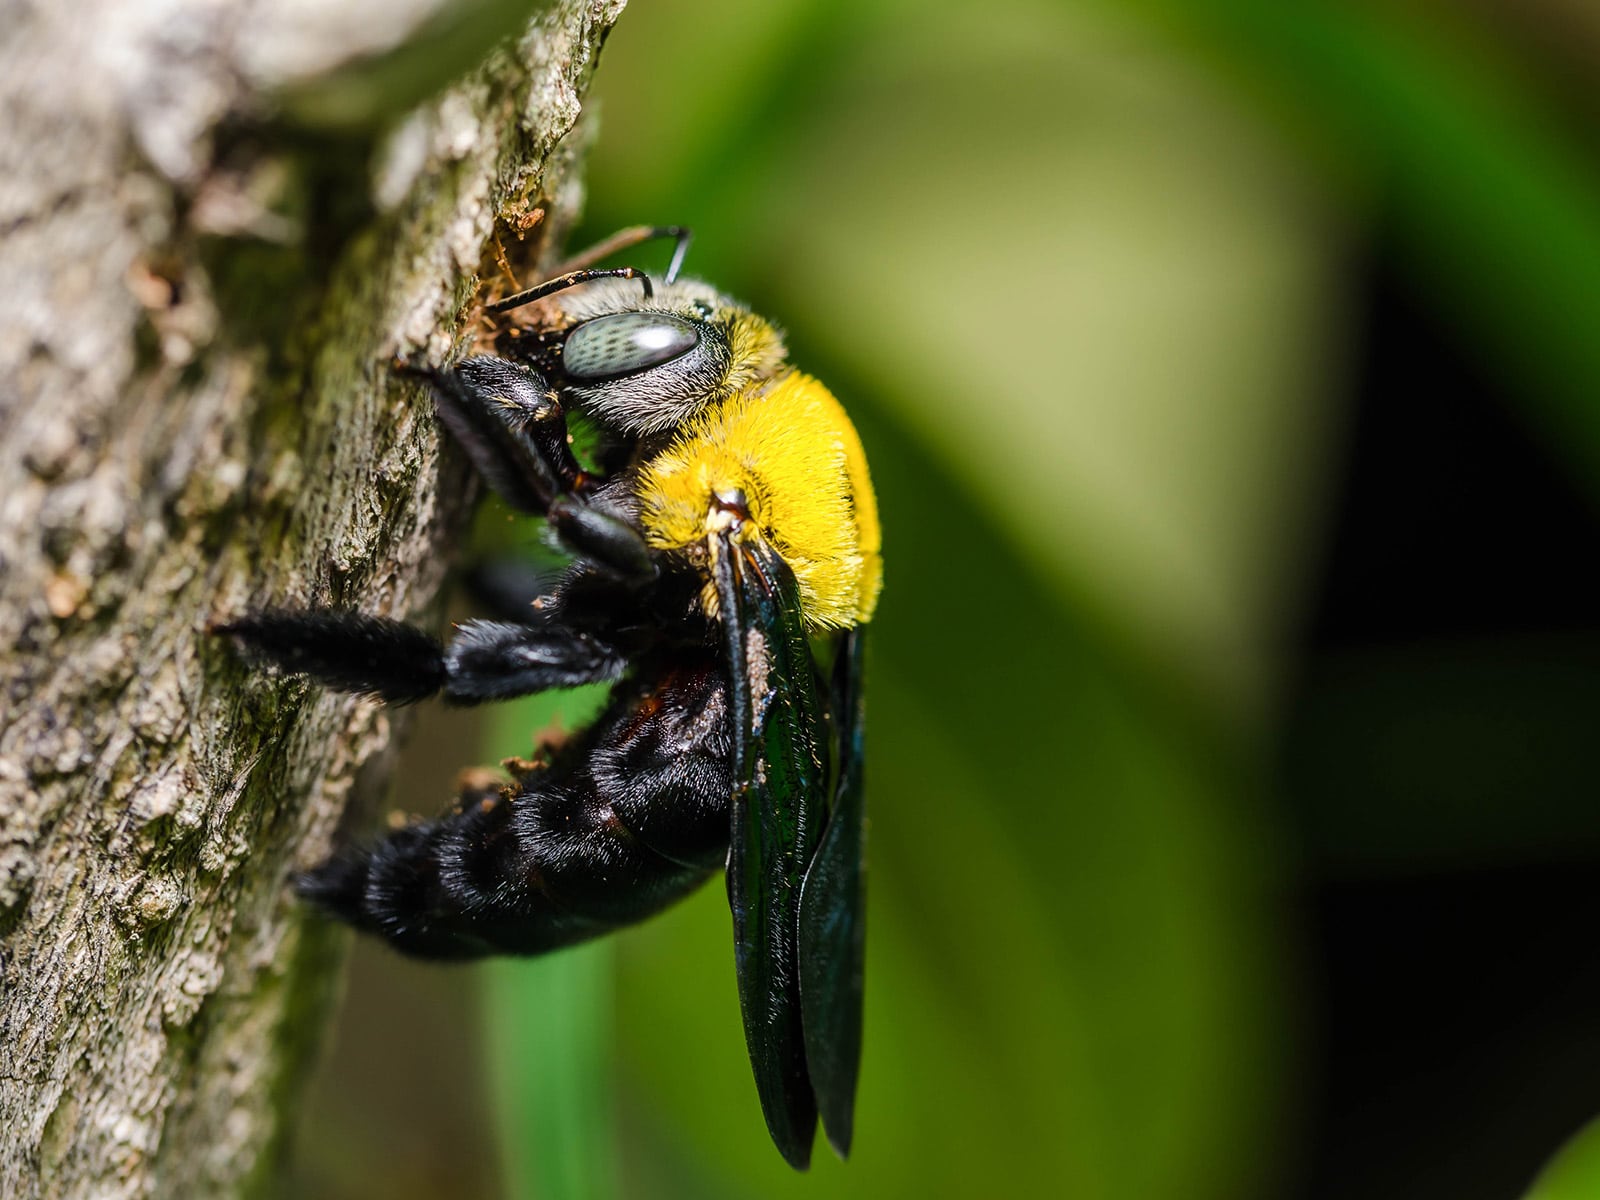 Close-up of a carpenter bee on tree bark